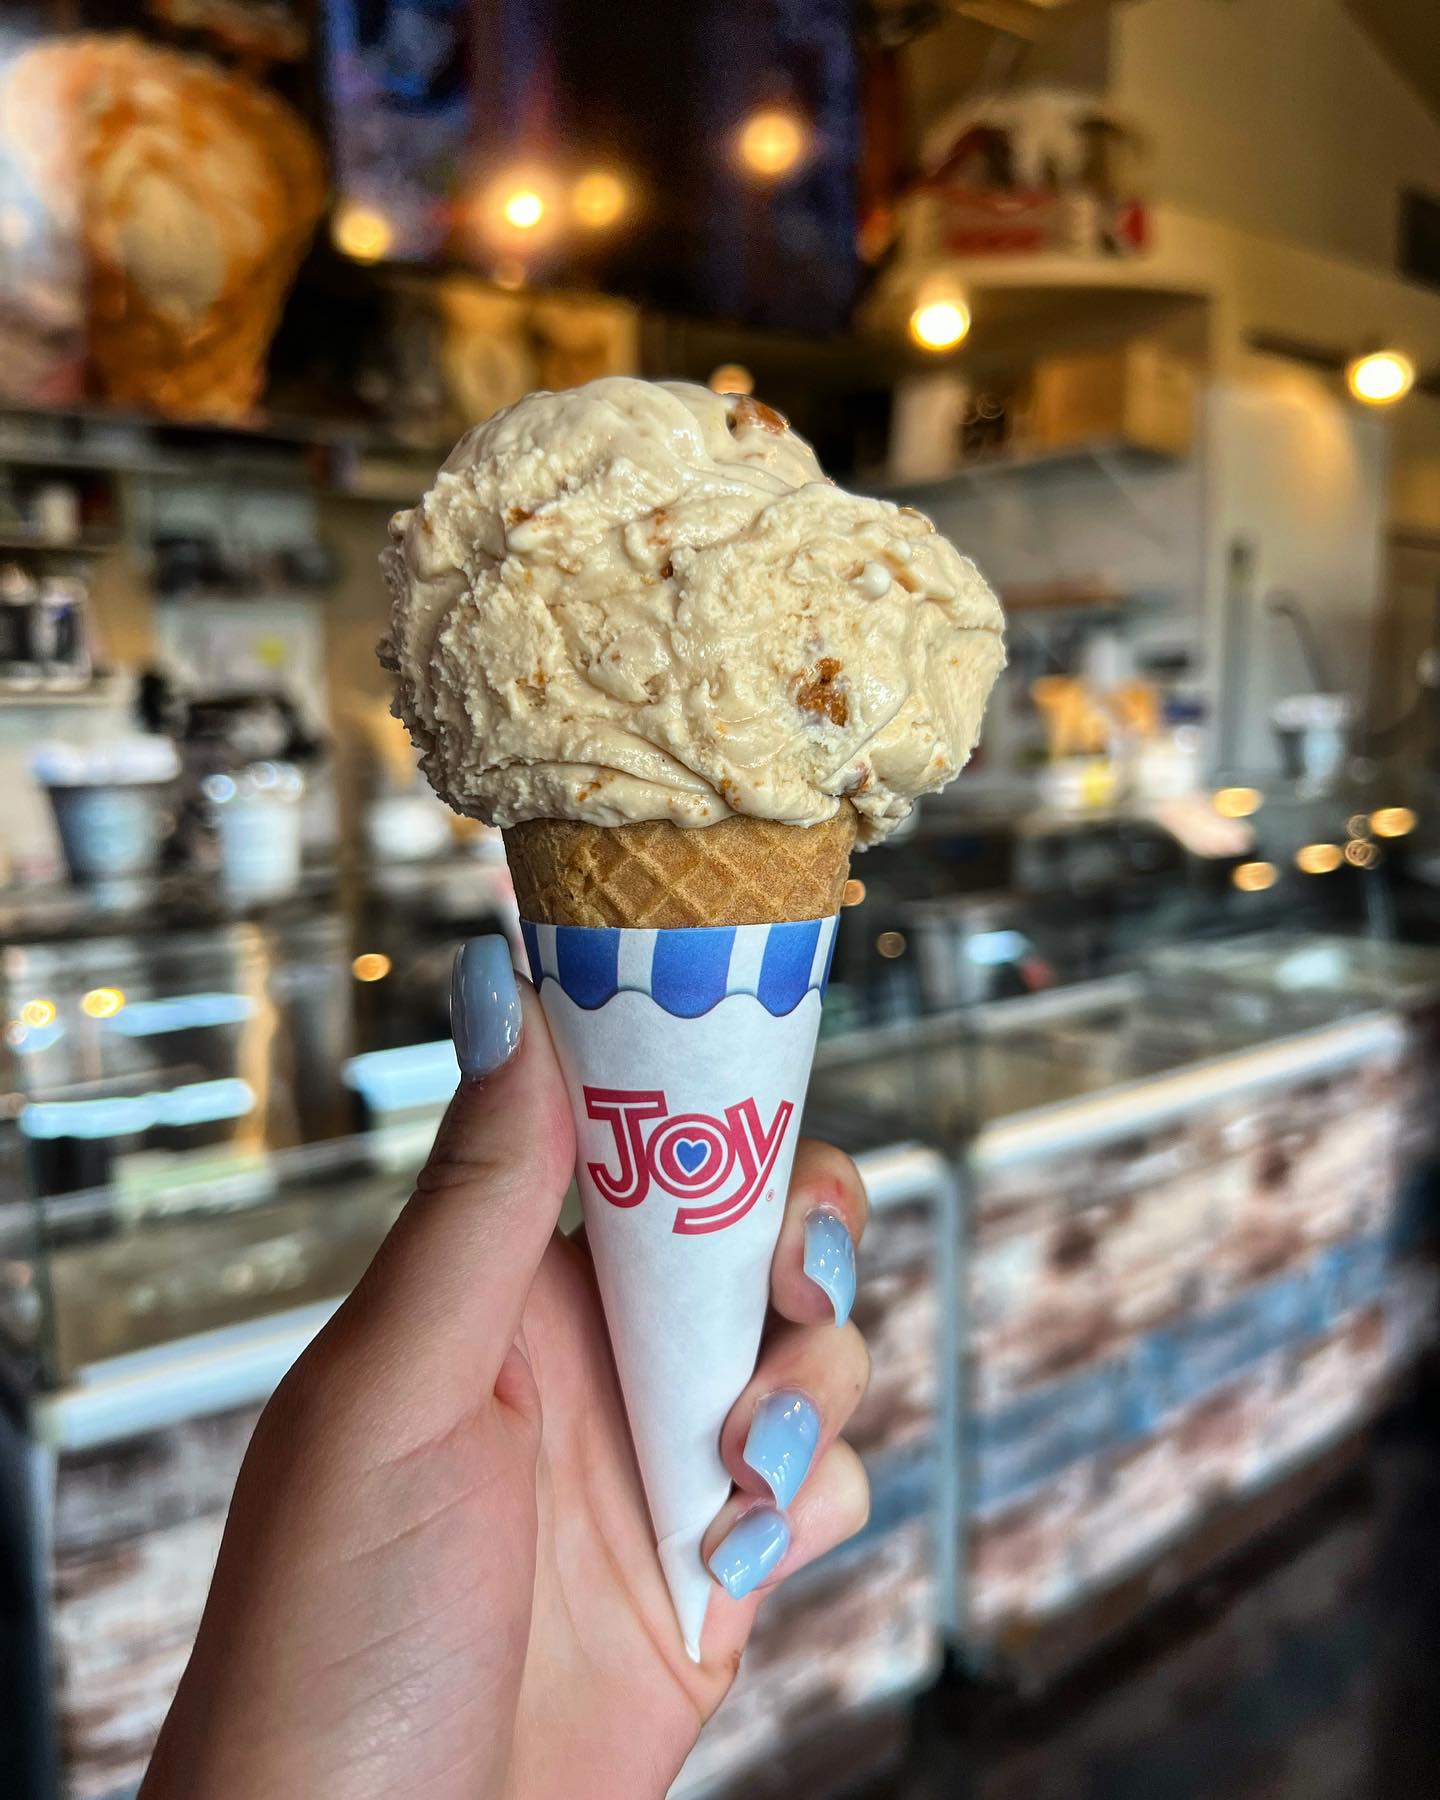 An ice cream (looks like butter pecan) in a cone held up with an ice cream shop in the background.